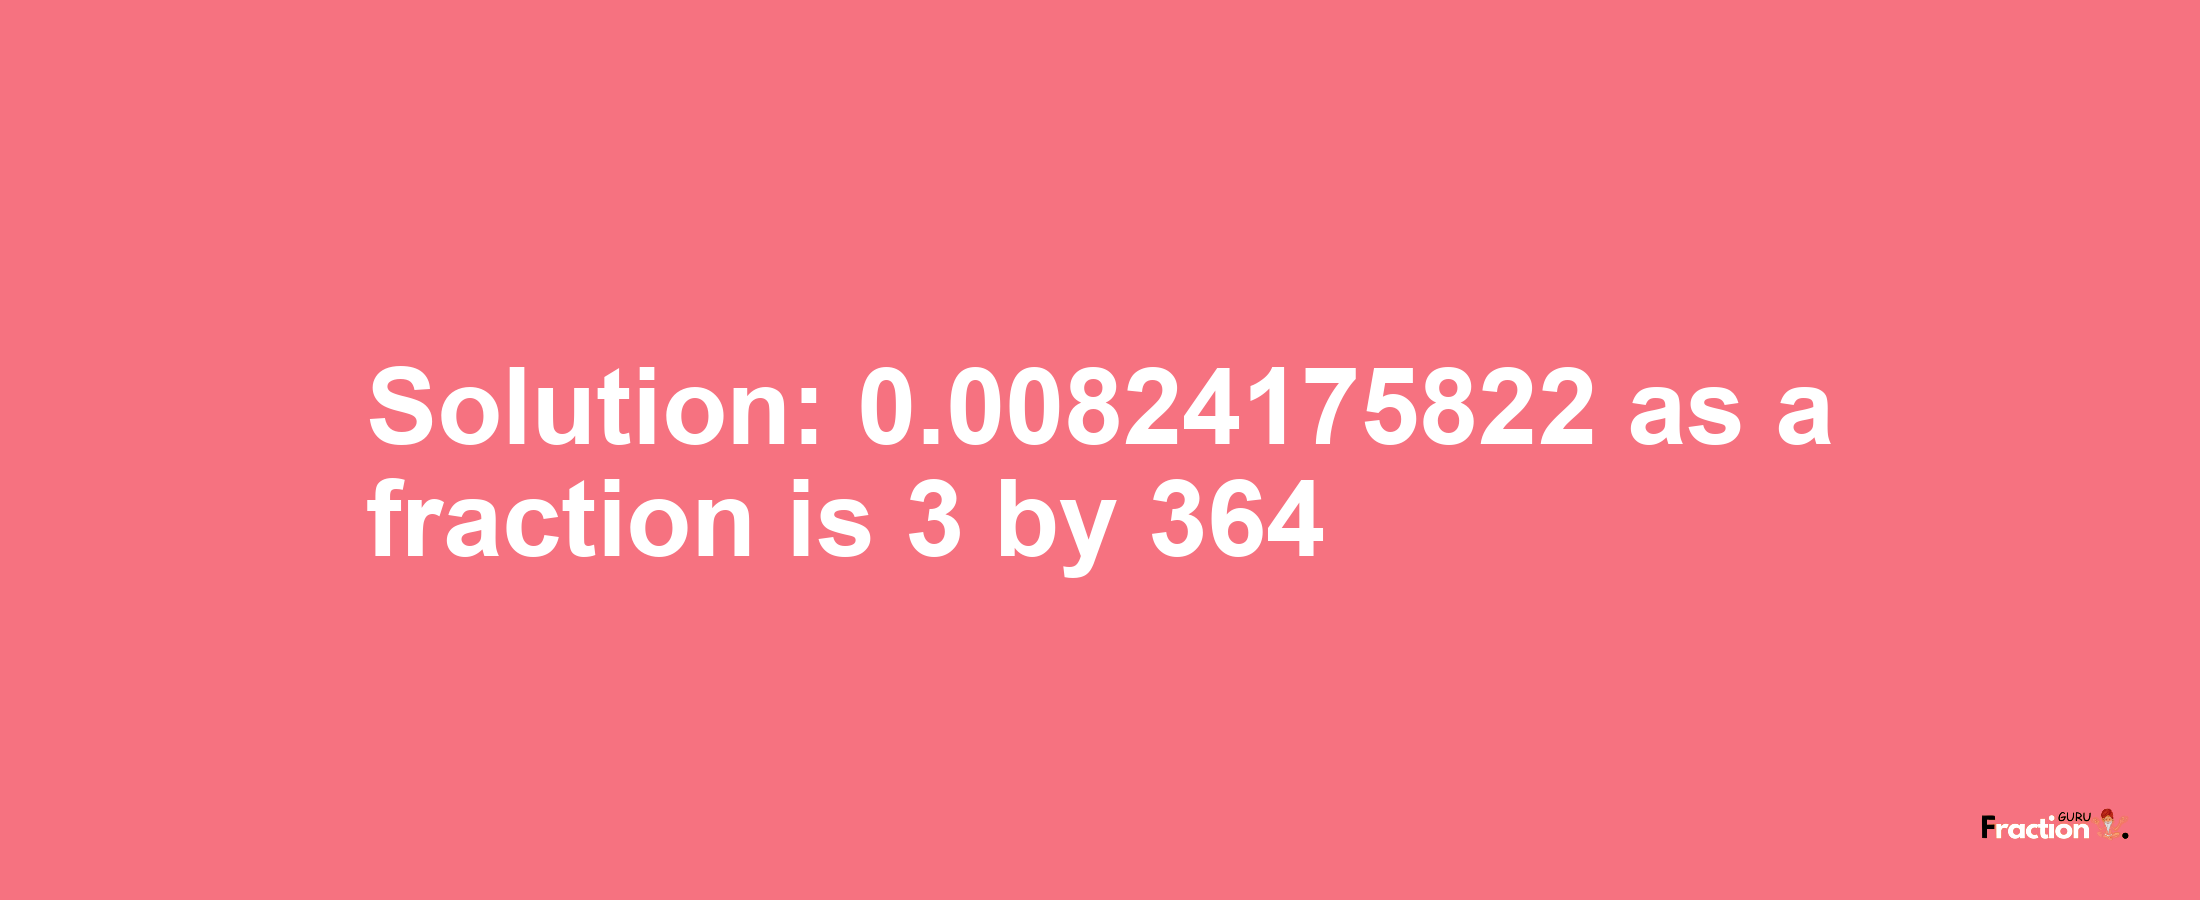 Solution:0.00824175822 as a fraction is 3/364